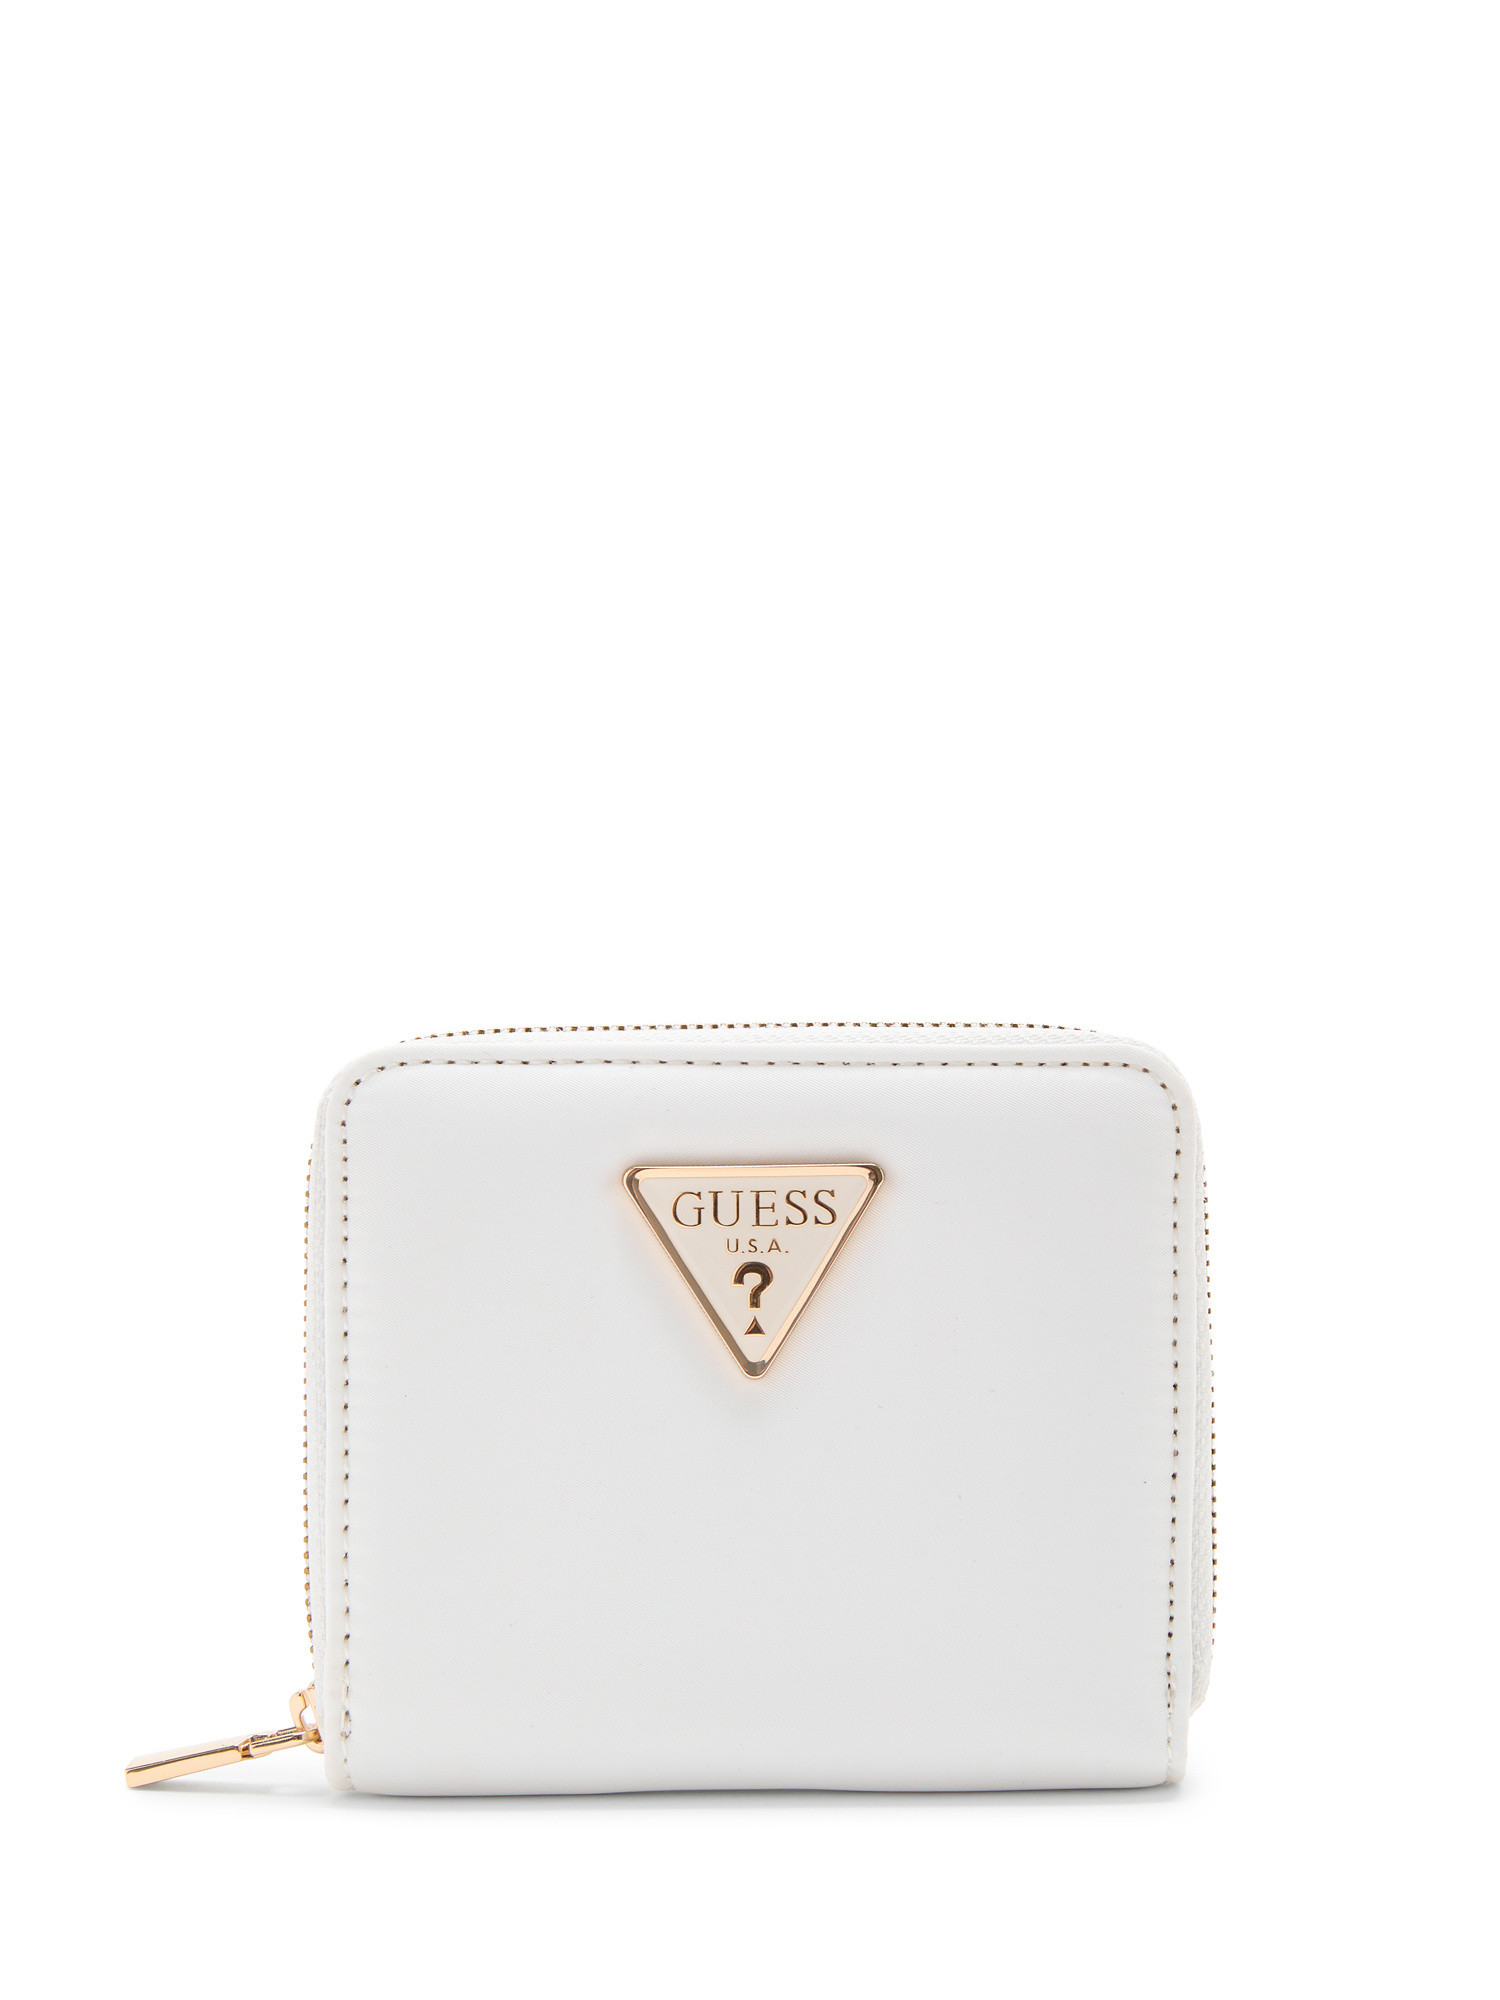 Guess - Gemma eco mini wallet, White, large image number 0